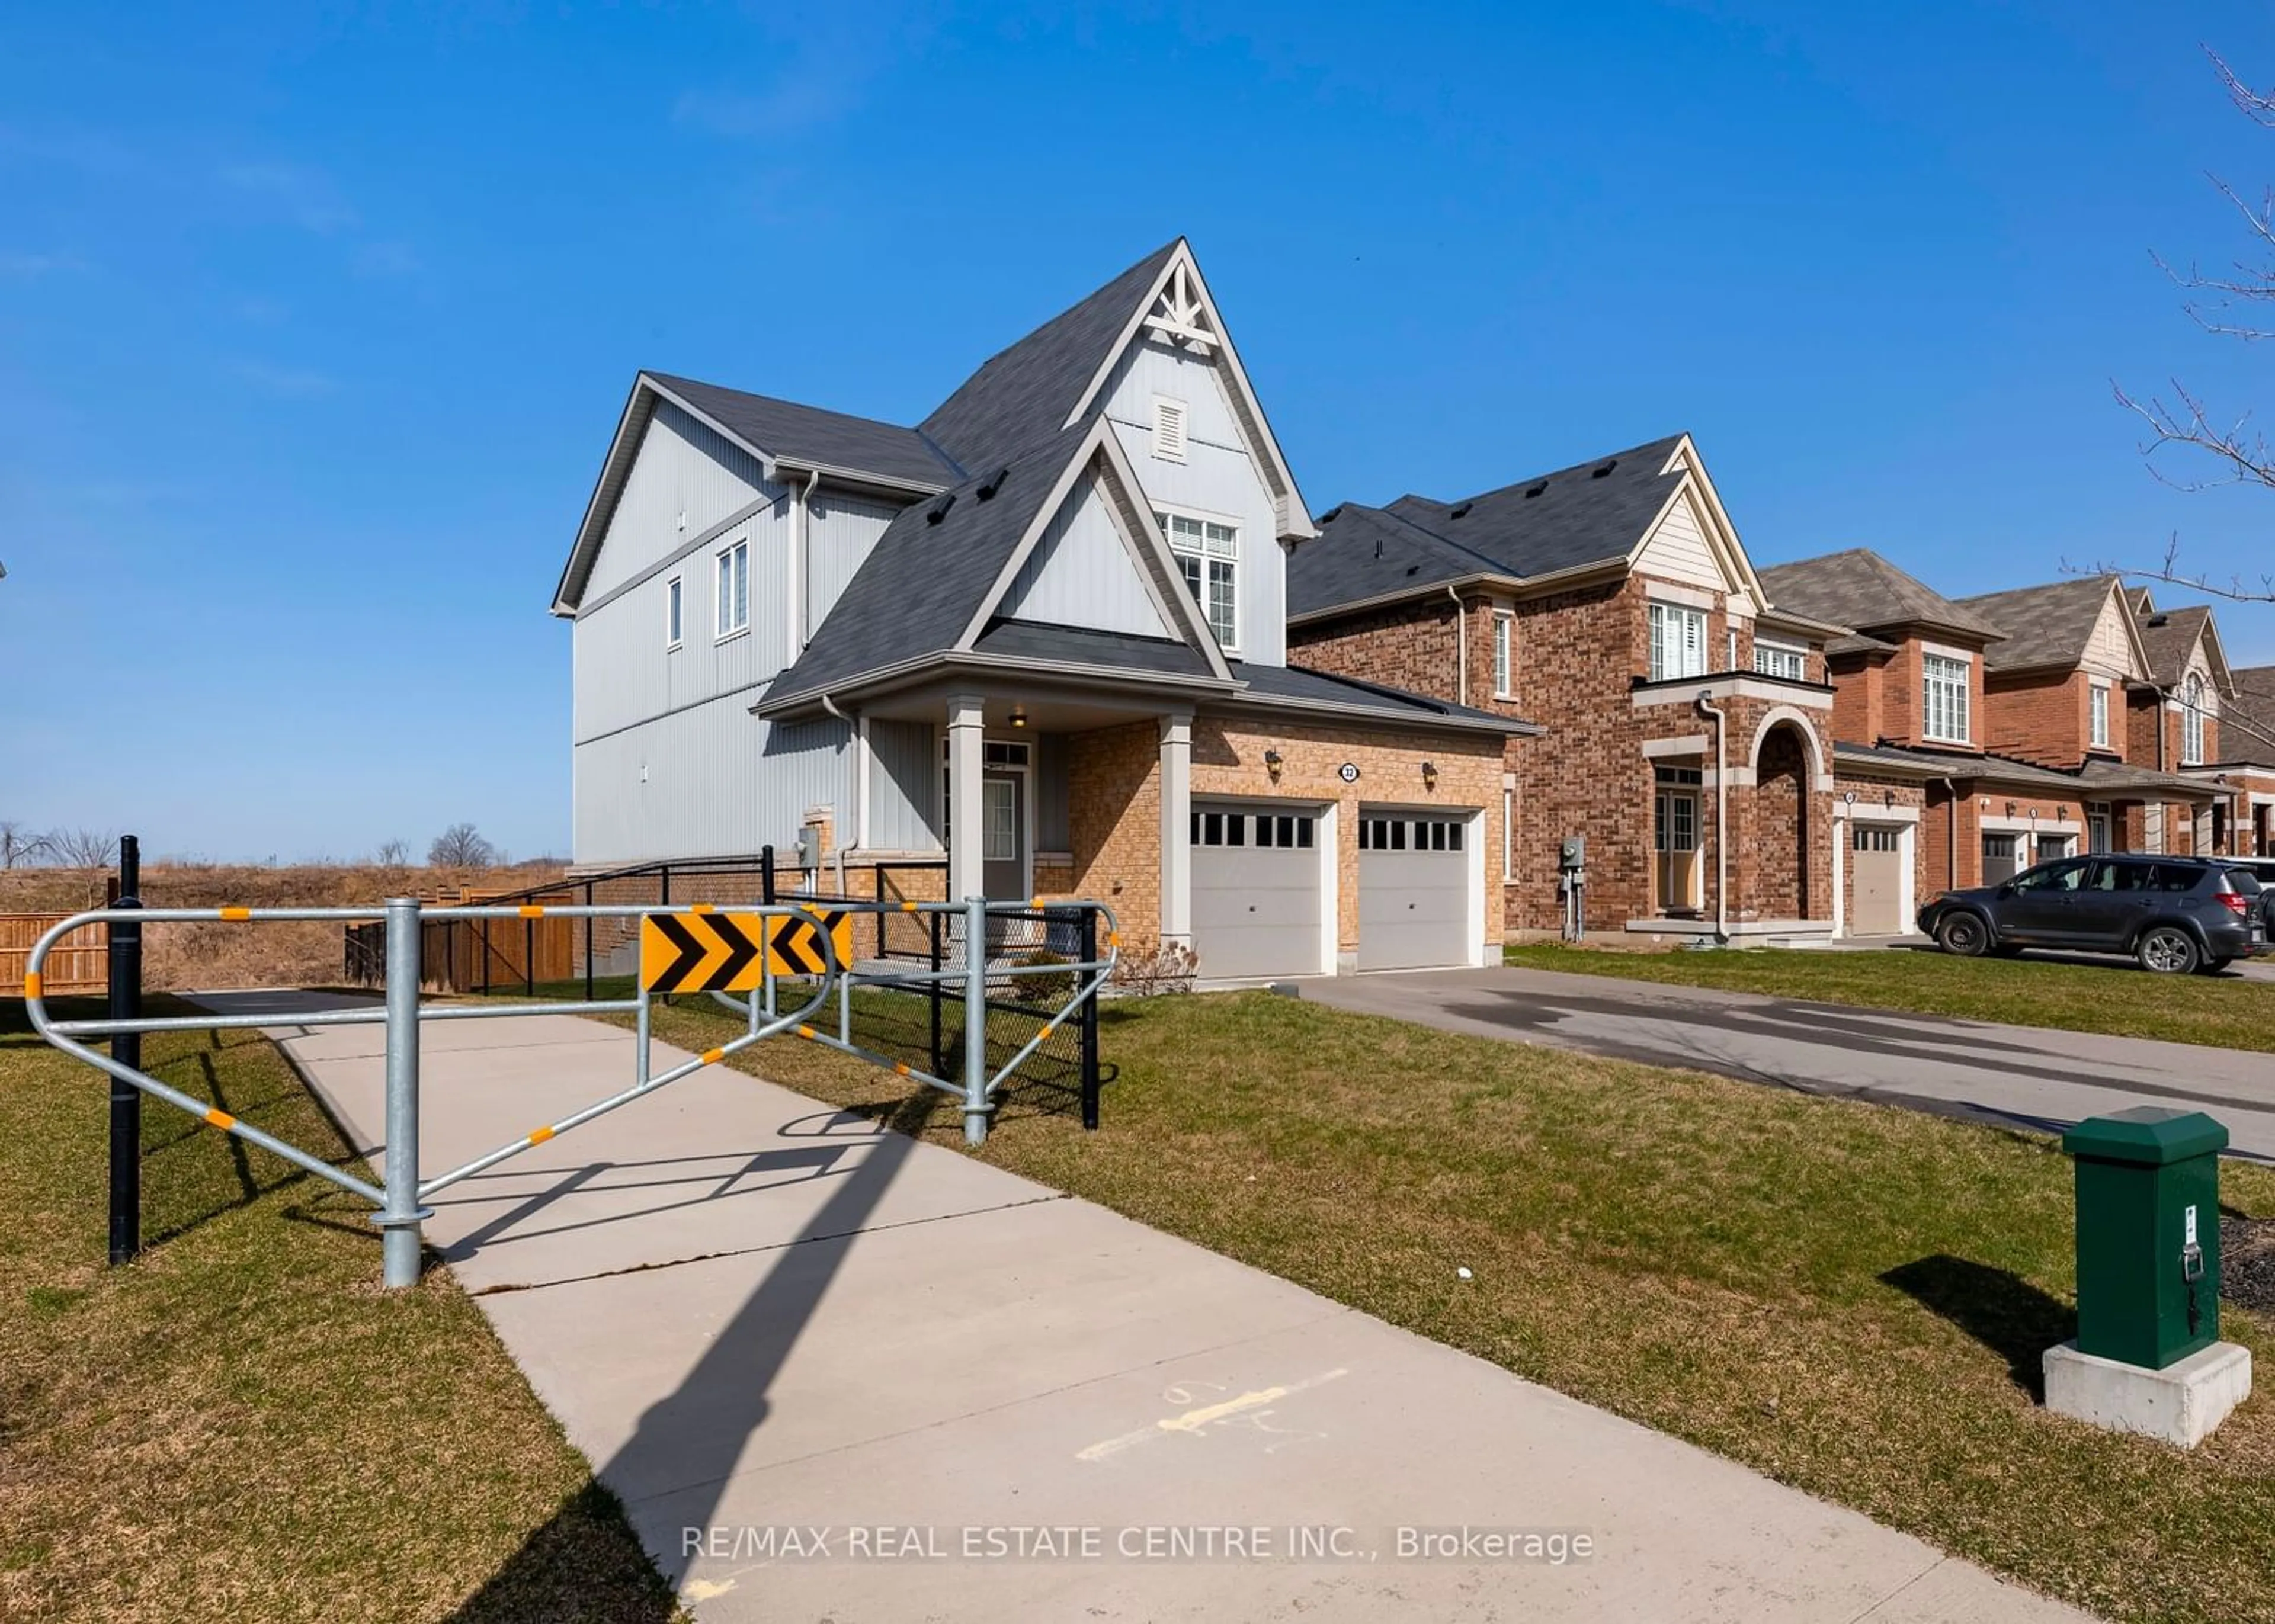 Frontside or backside of a home for 32 Jenkins St, East Luther Grand Valley Ontario L9W 7R3